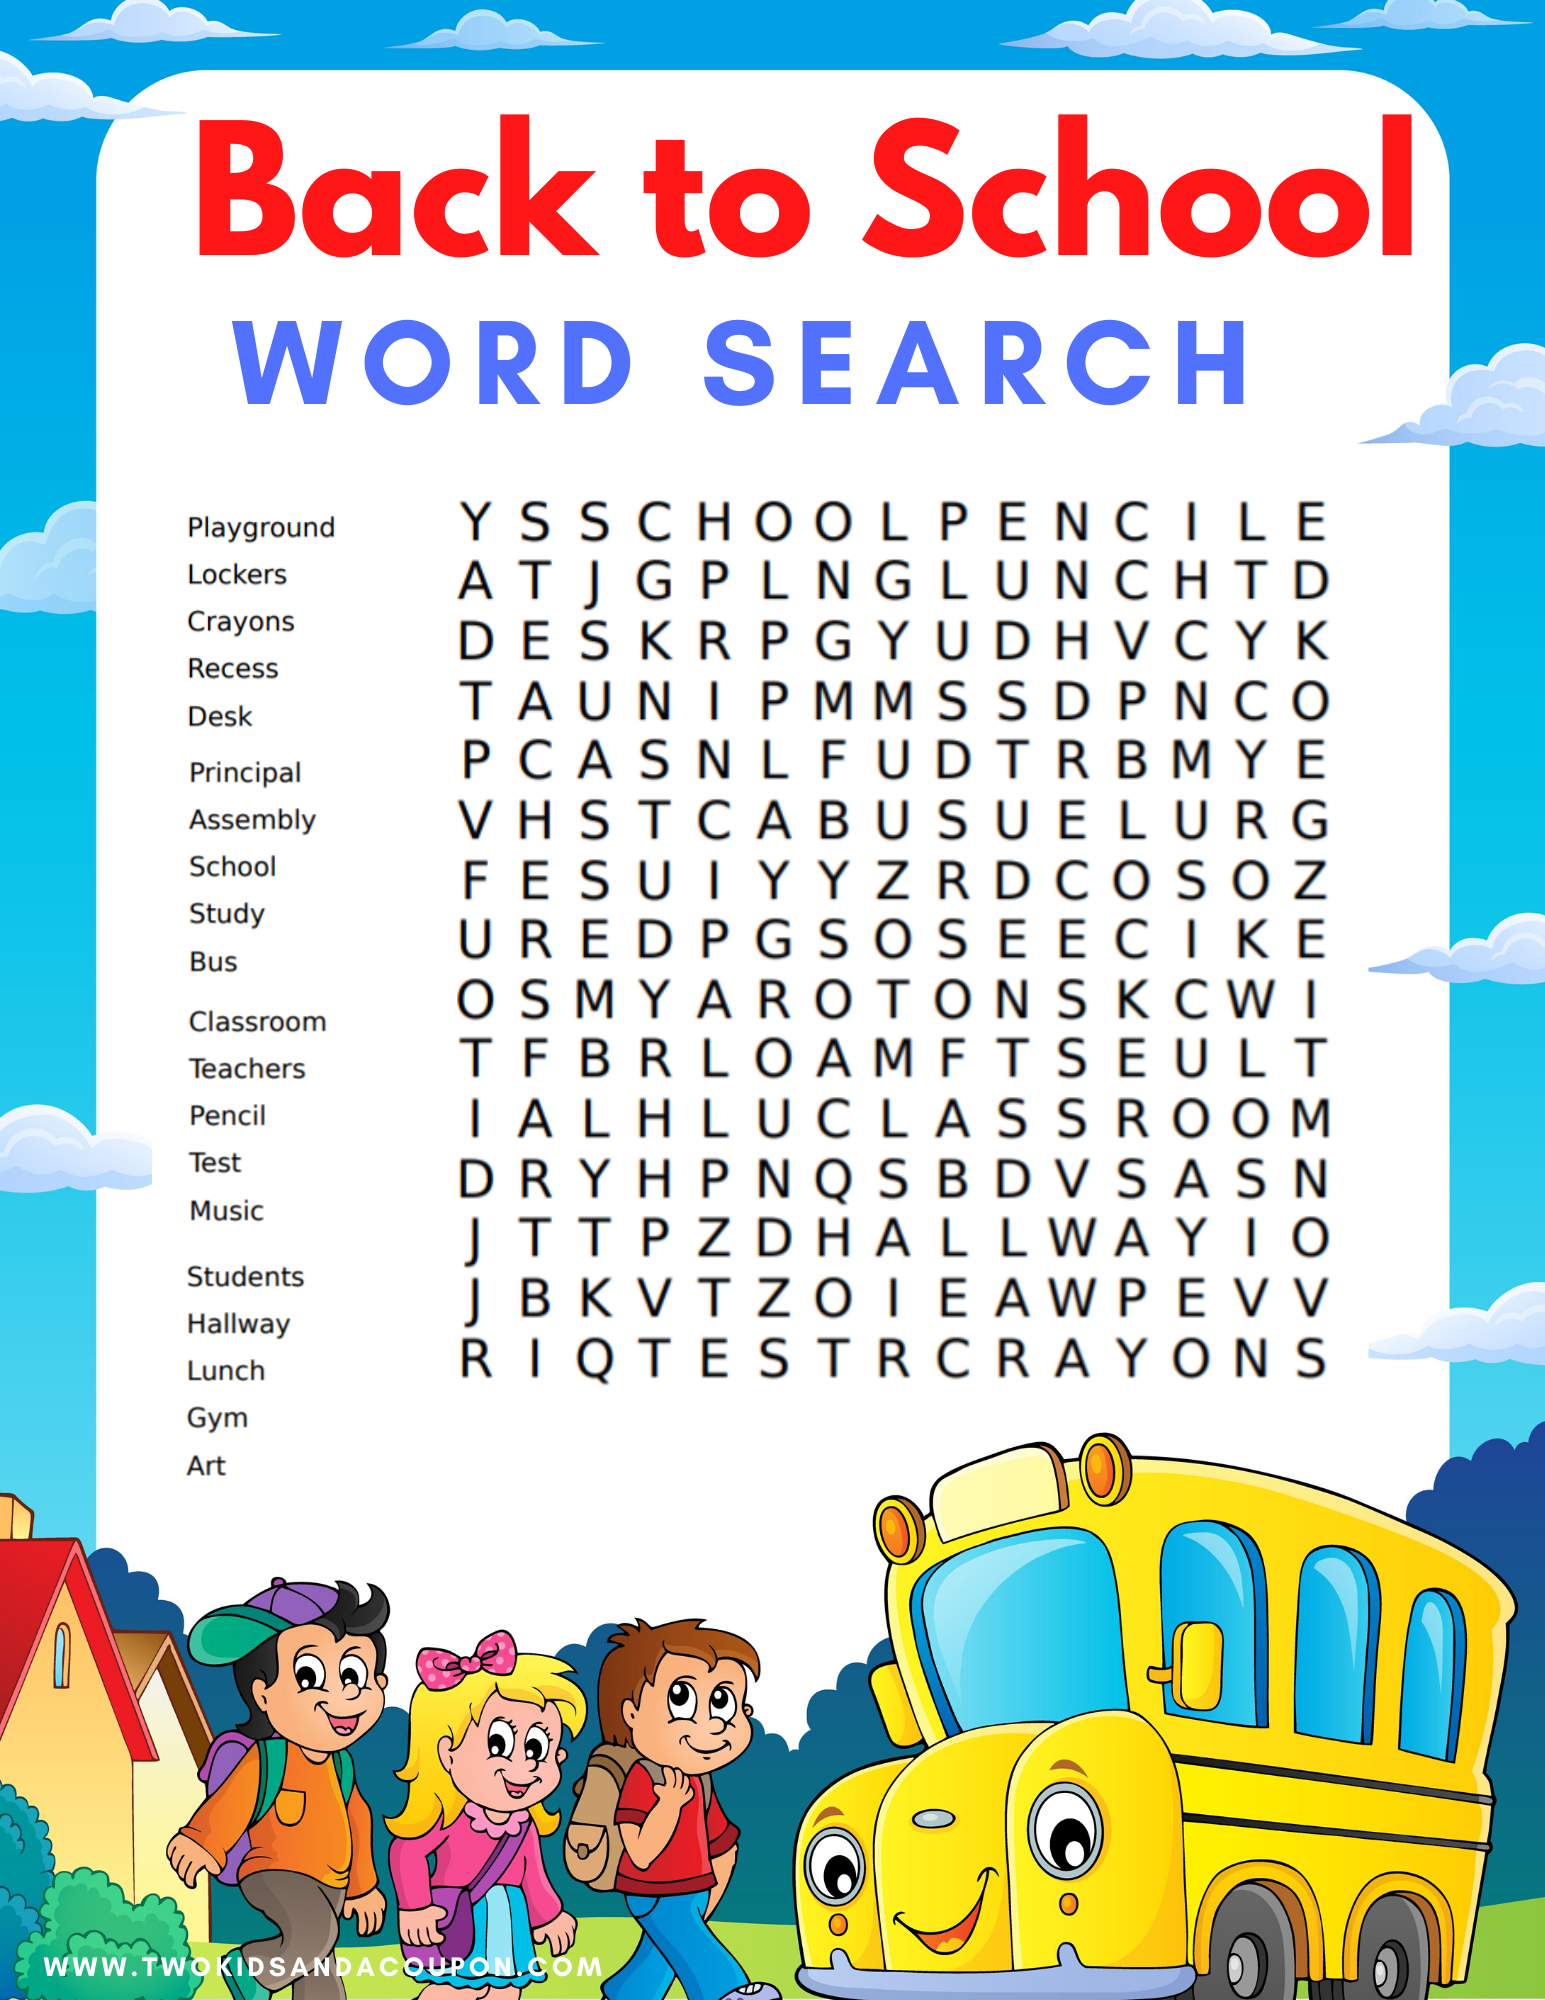 back-to-school-word-search-for-kids-allfreepapercrafts